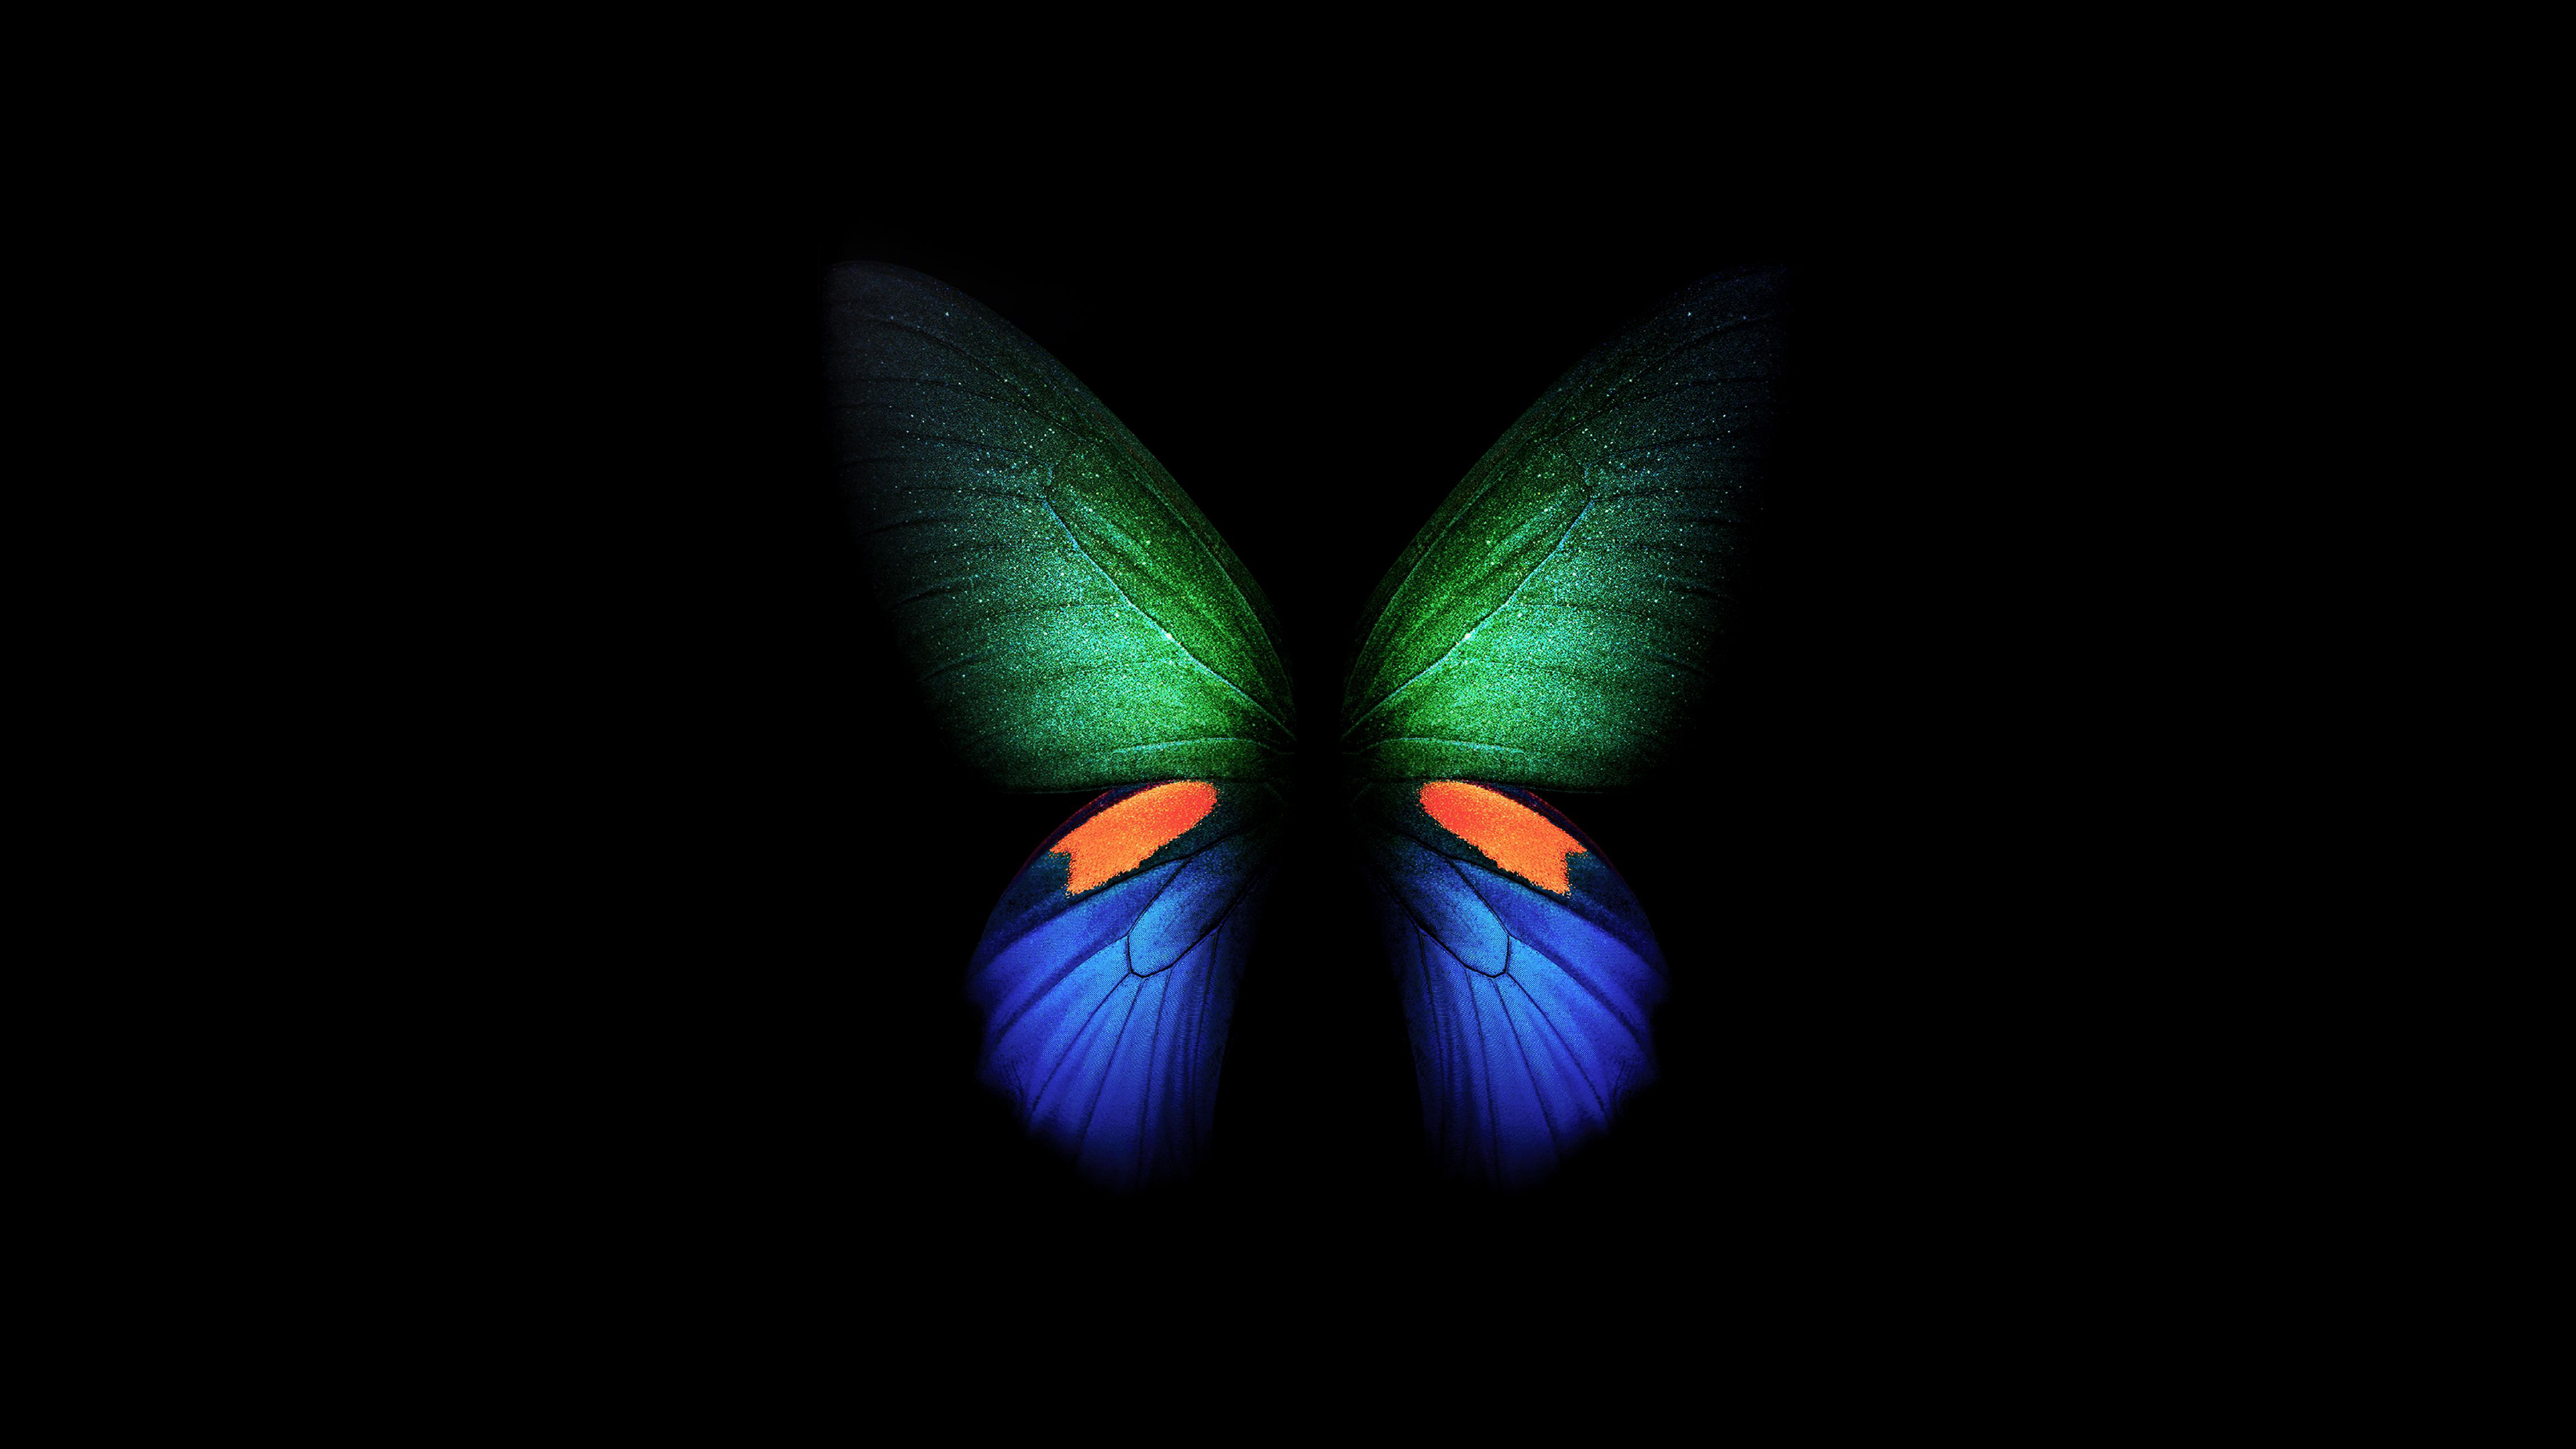 samsung galaxy fold hd artist 4k wallpapers images backgrounds photos and pictures samsung galaxy fold hd artist 4k